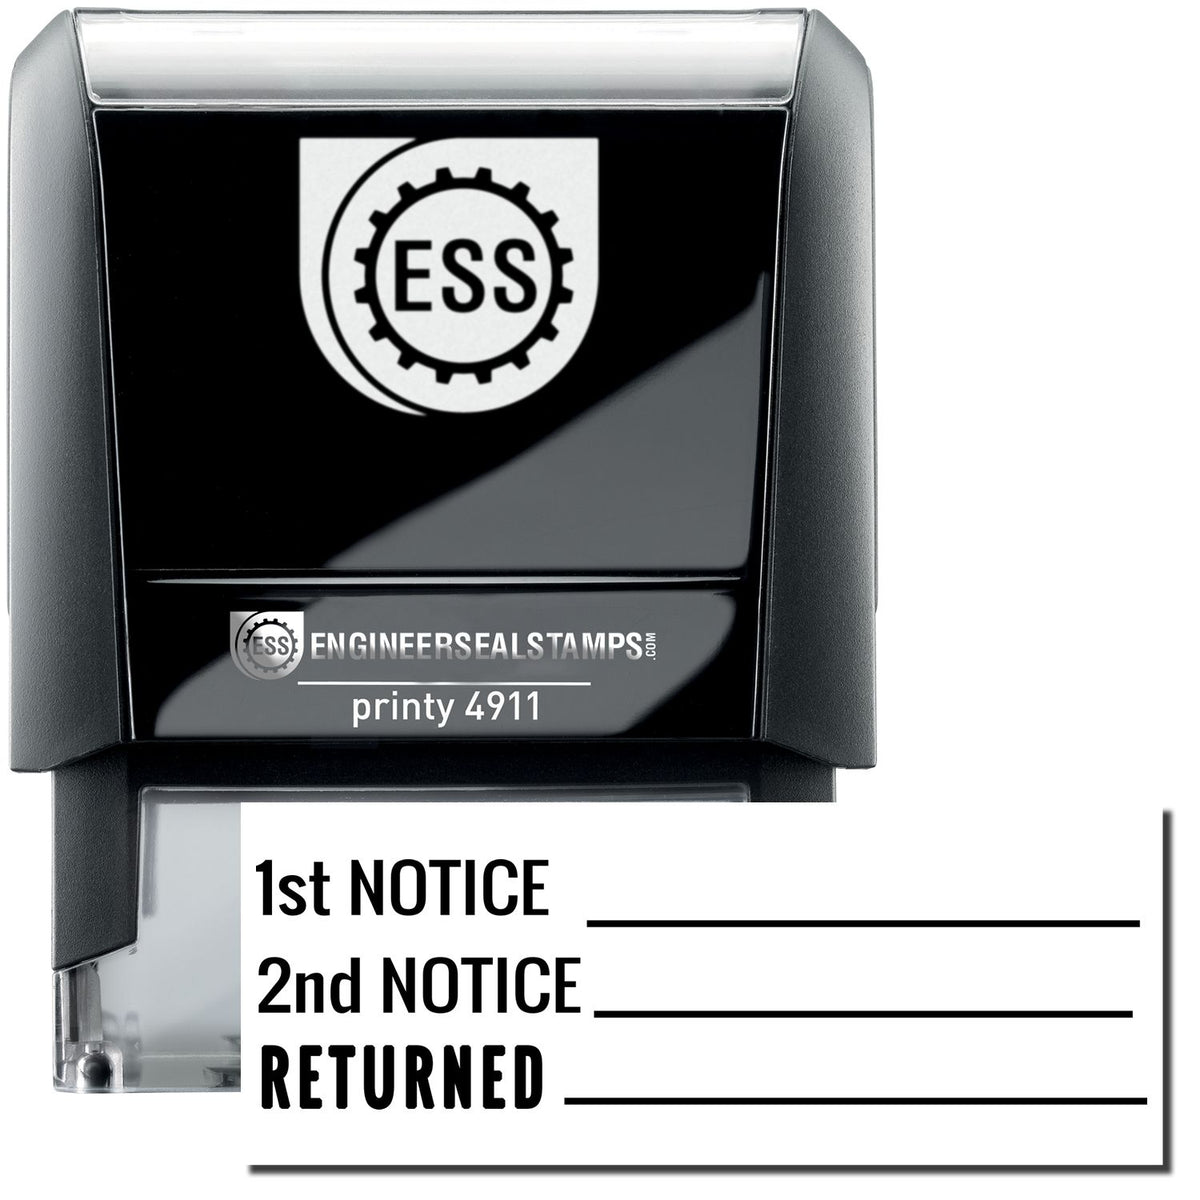 A self-inking stamp with a stamped image showing how the texts &quot;1st NOTICE&quot;, &quot;2nd NOTICE&quot;, and &quot;RETURNED&quot; with a line after each text is displayed after stamping.